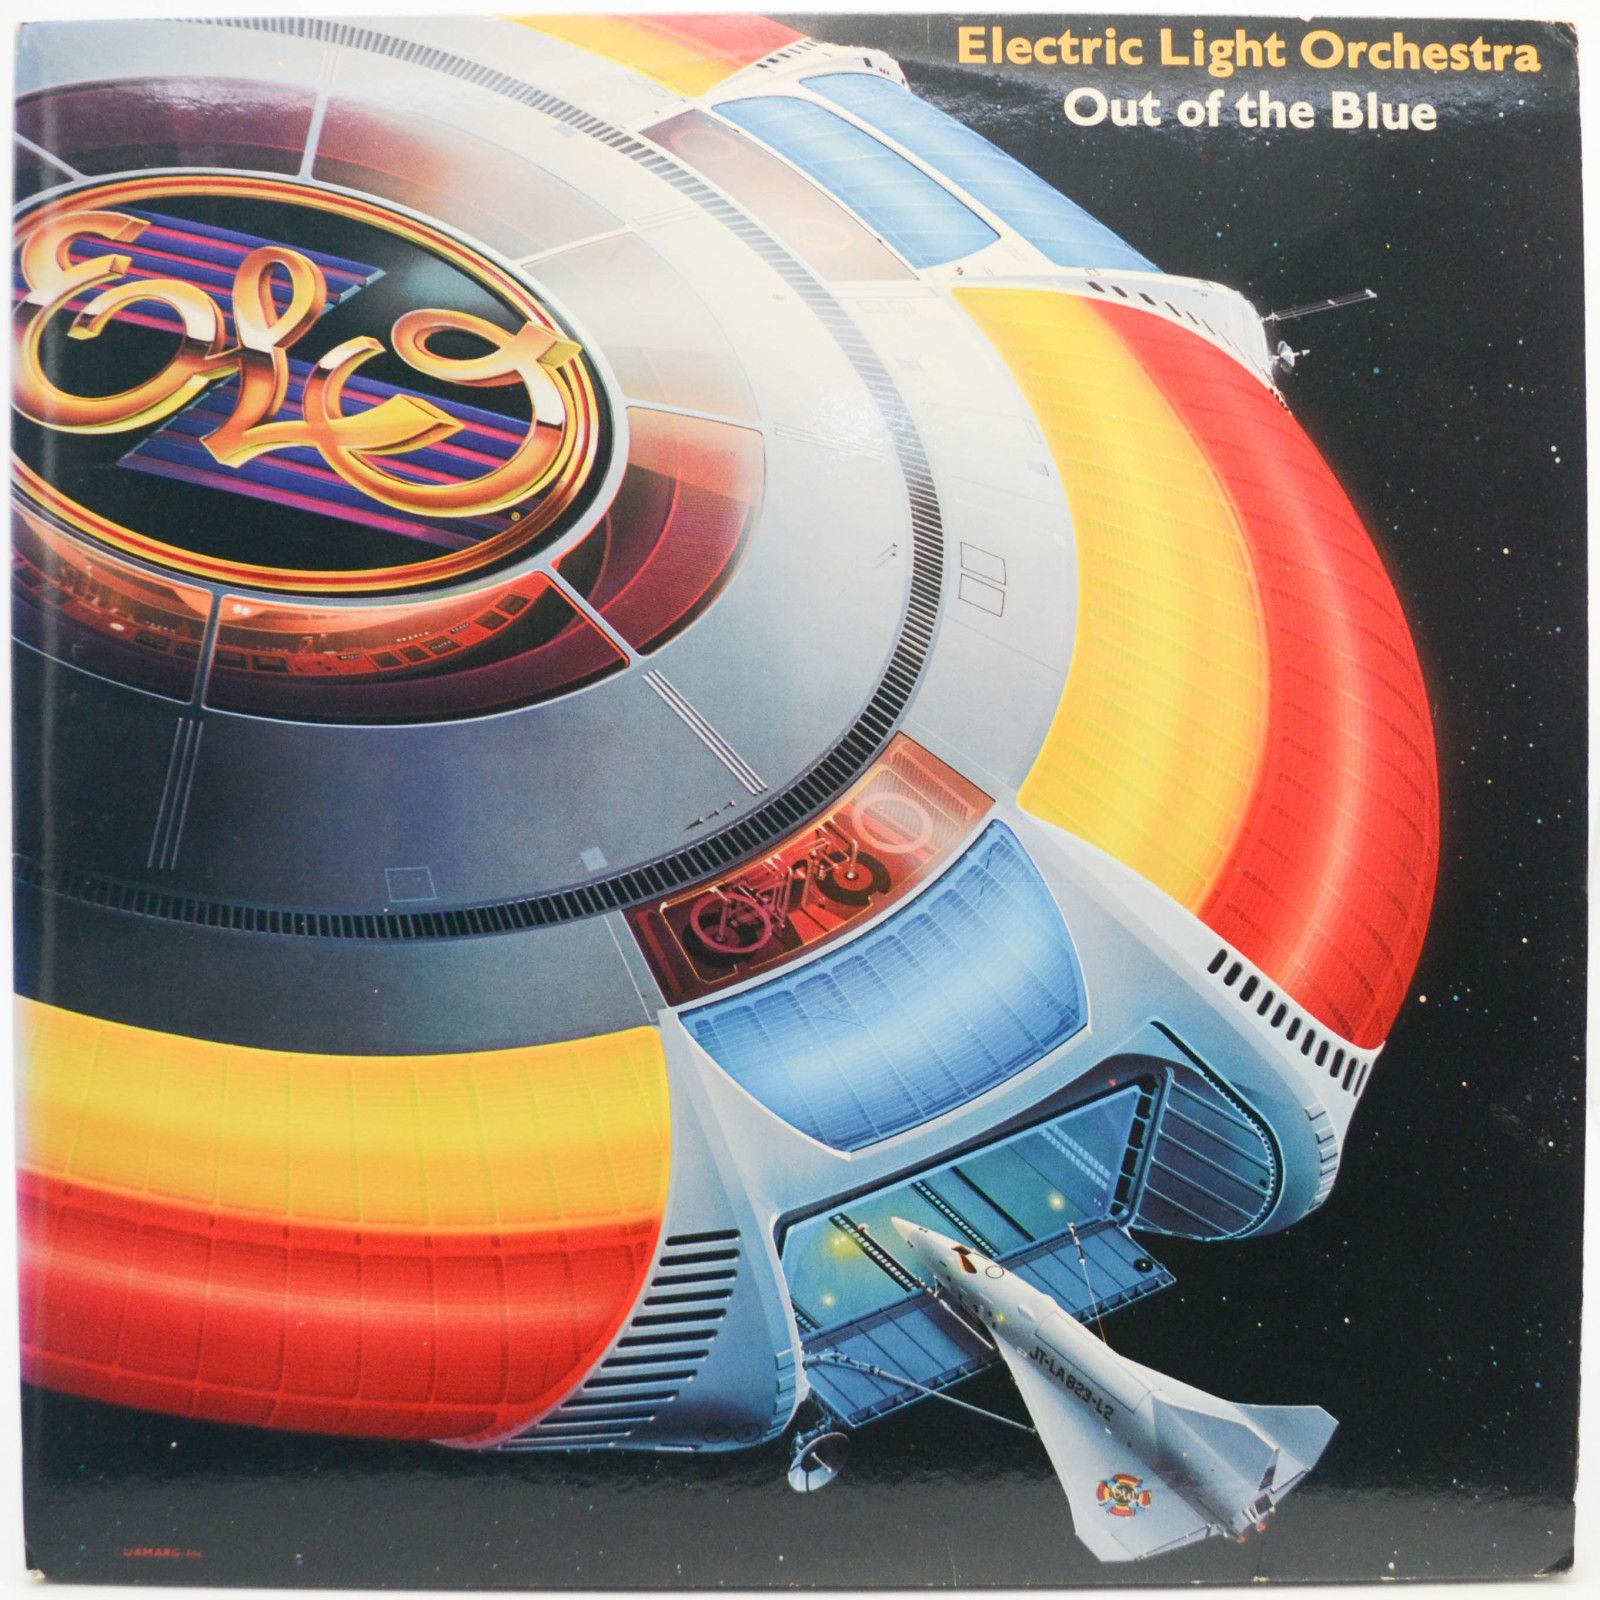 Electric Light Orchestra — Out Of The Blue (2LP, USA), 1977